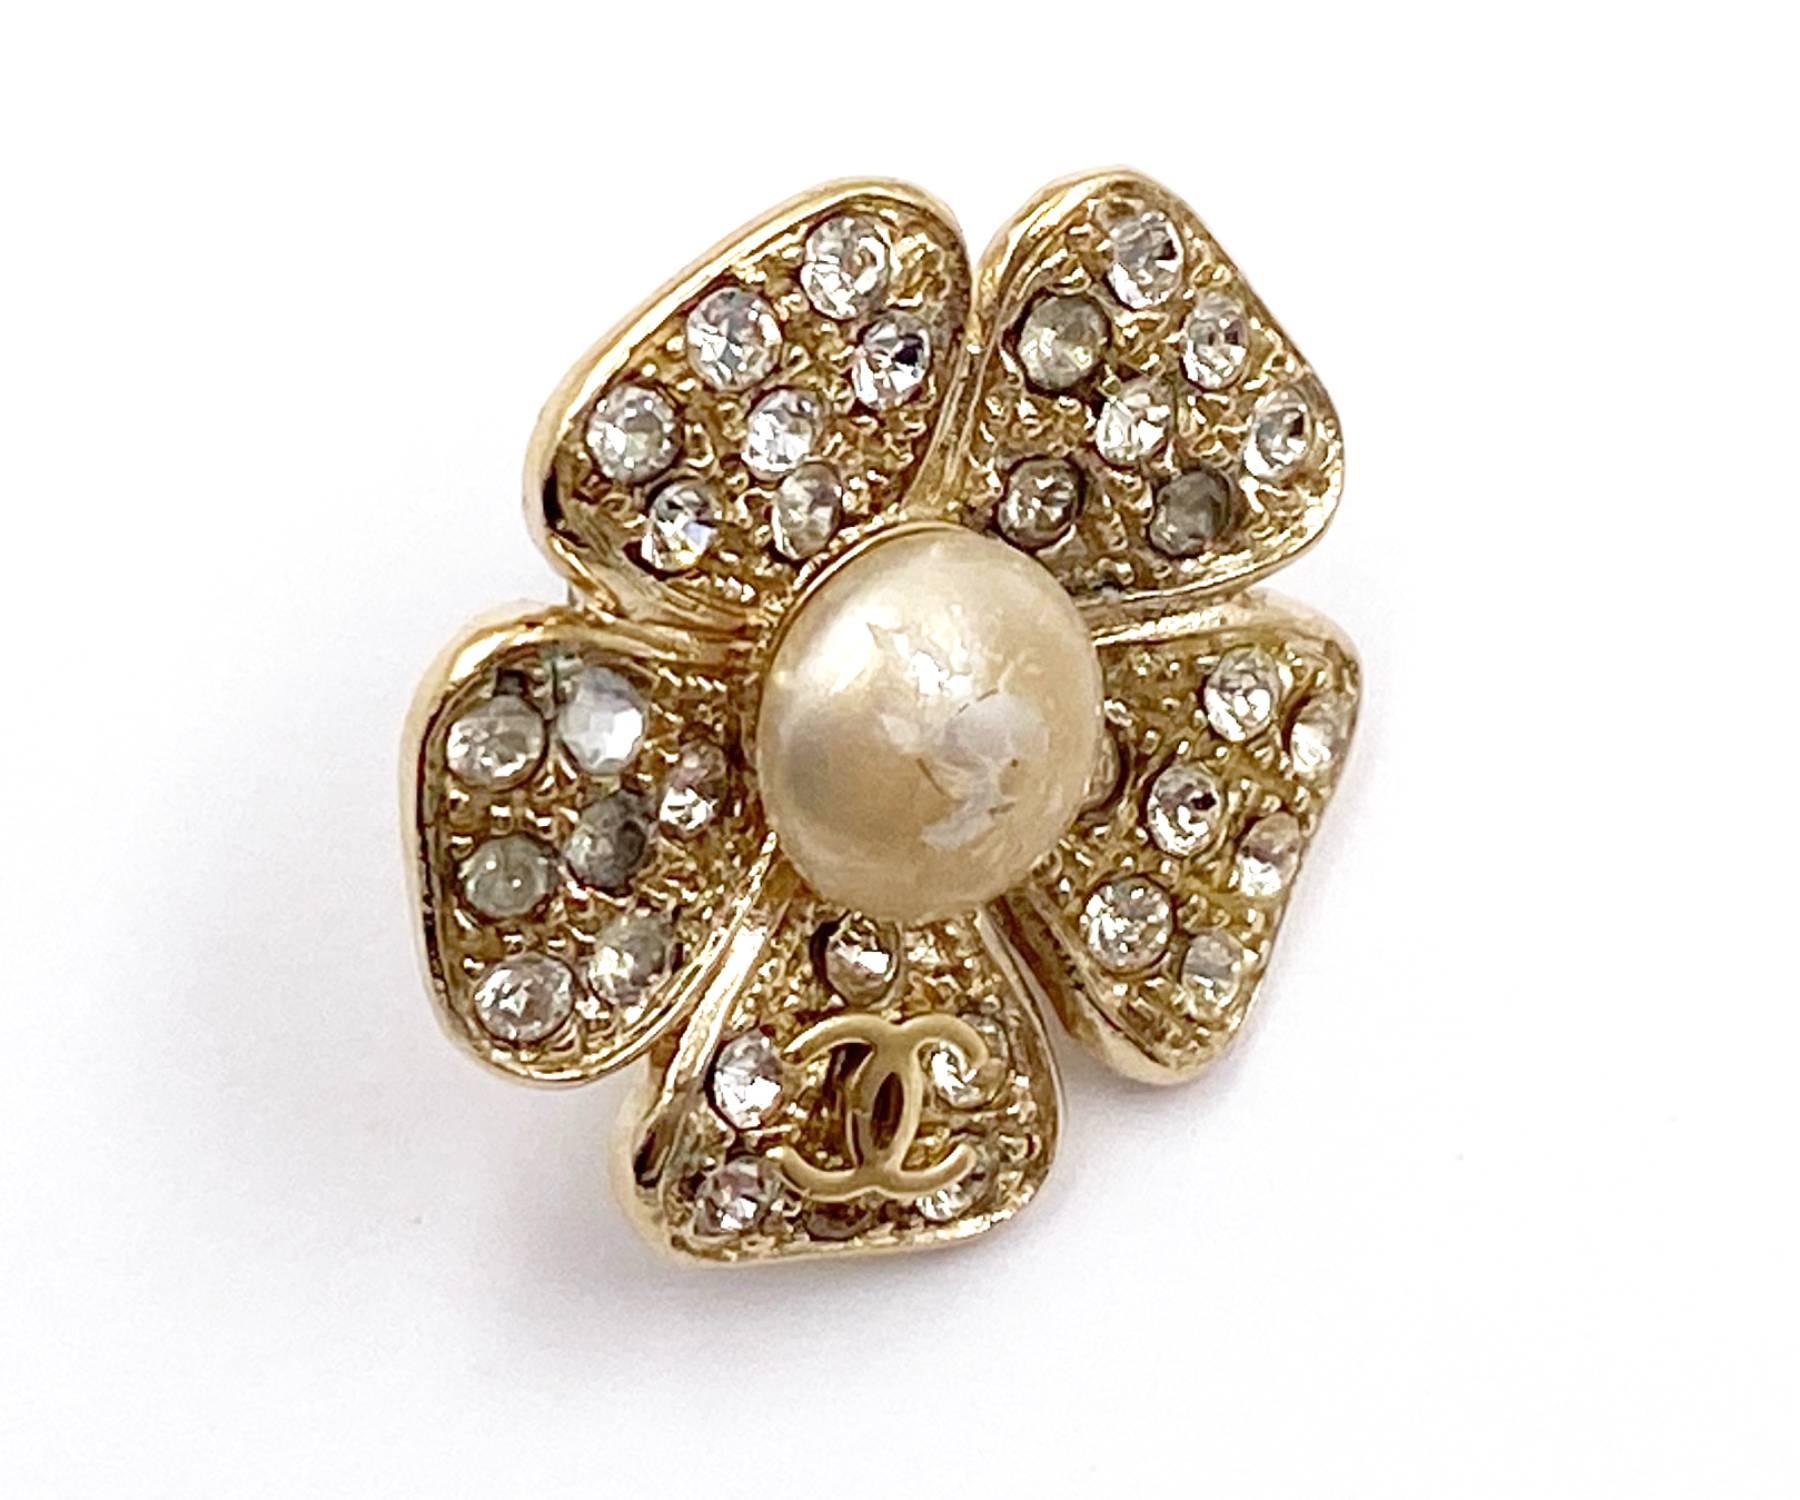 Chanel Vintage Classic Gold Plated CC Flower Pearl Crystal Pin

*Marked in 07
*Made in France

-Approximately 1.25″ x 1.25″
-Very pretty and classic
-The faux pearl has scratches and some crystals turned dull. The pull turned silver.

2017-42105